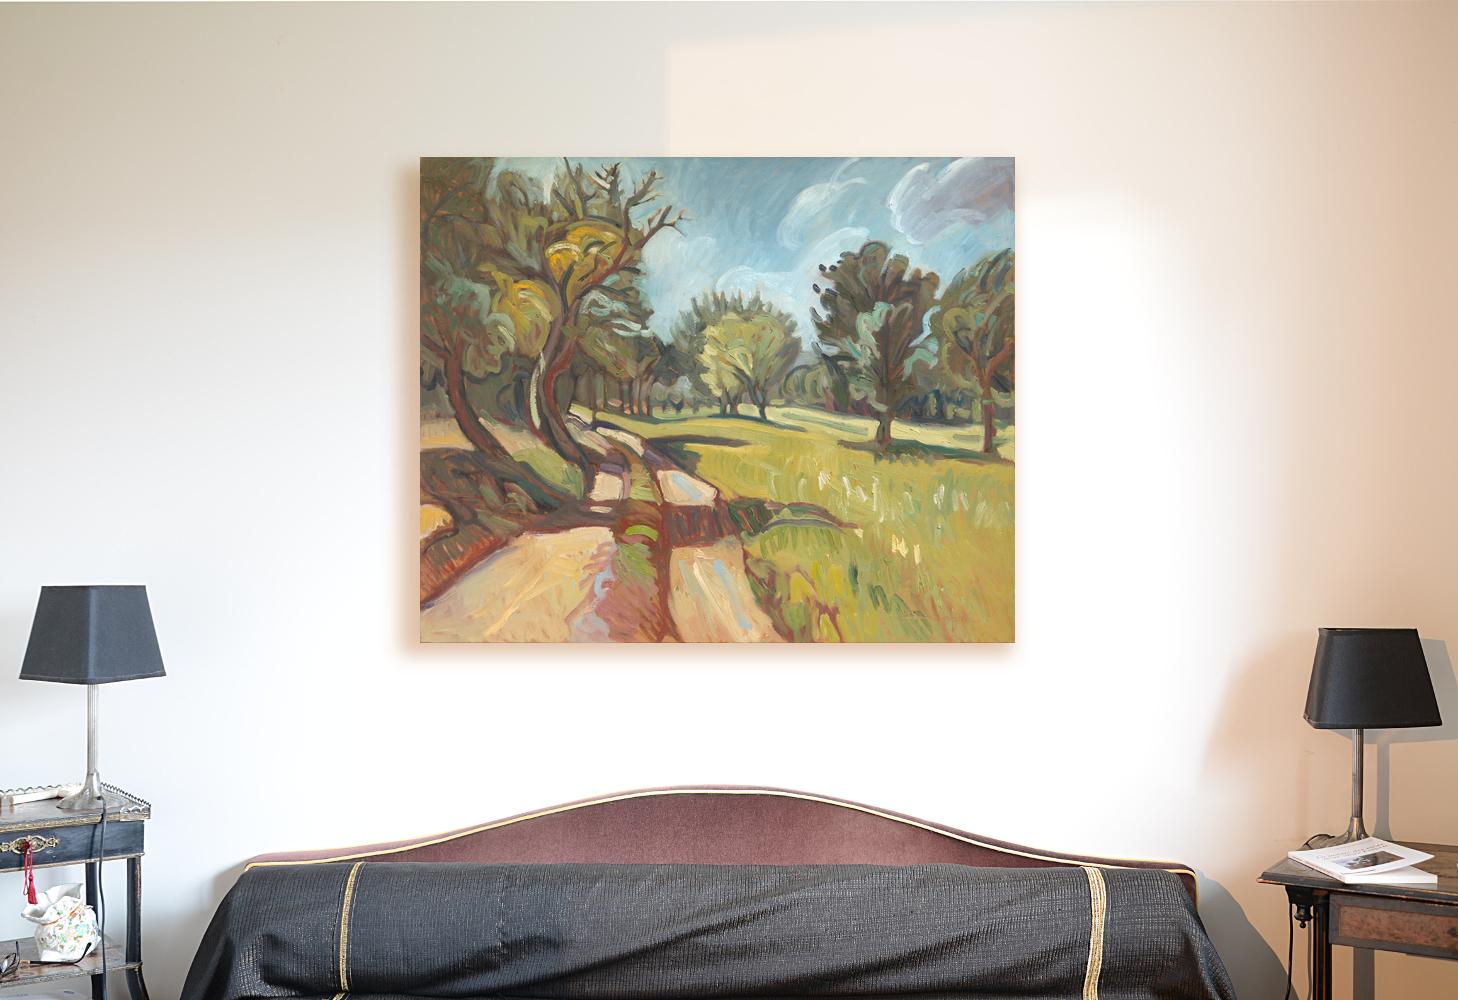 This artwork depicts a rural landscape.

Yves Calméjane usually uses light impasto techniques, with the weft of the canvas often still visible. The reliefs are quite thin, the painting often spread out, with frank touches on some parts of the